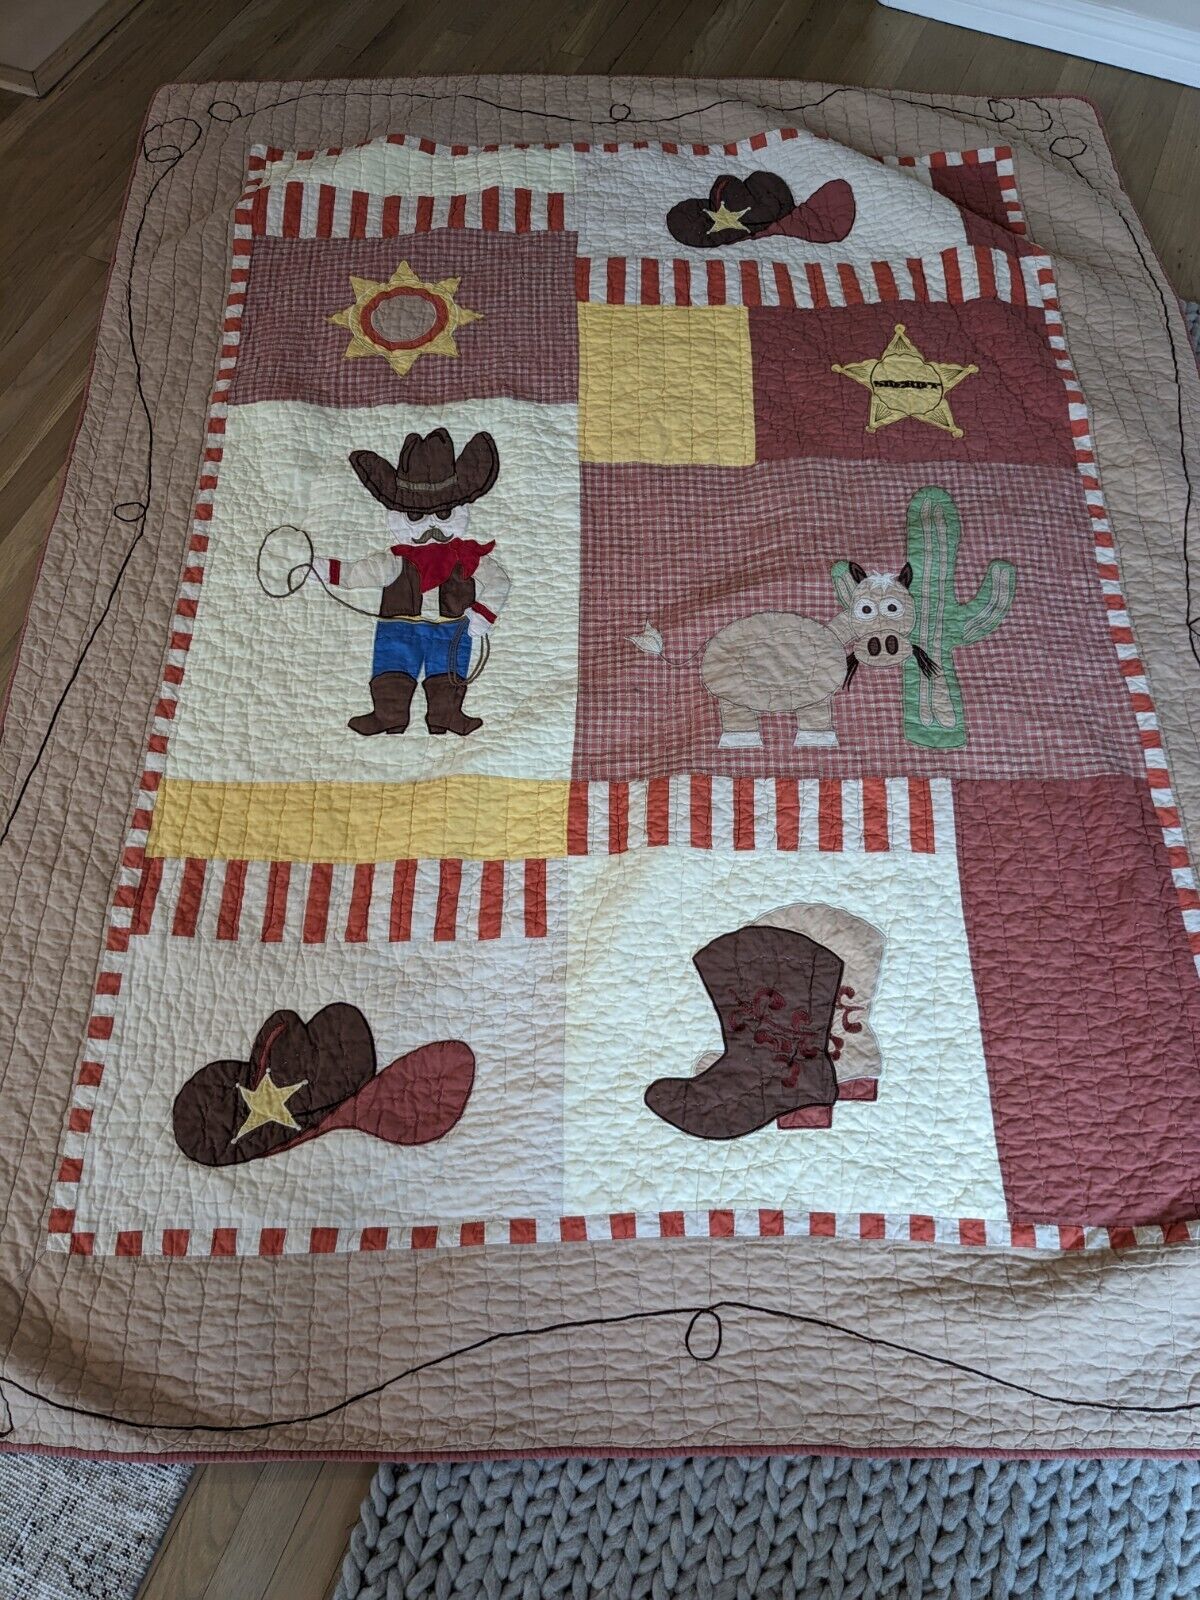 Nice Cowboy Quilt, 5\' X 7\', Cotton Blend, Looks Hand Stitched, Few Small Stains